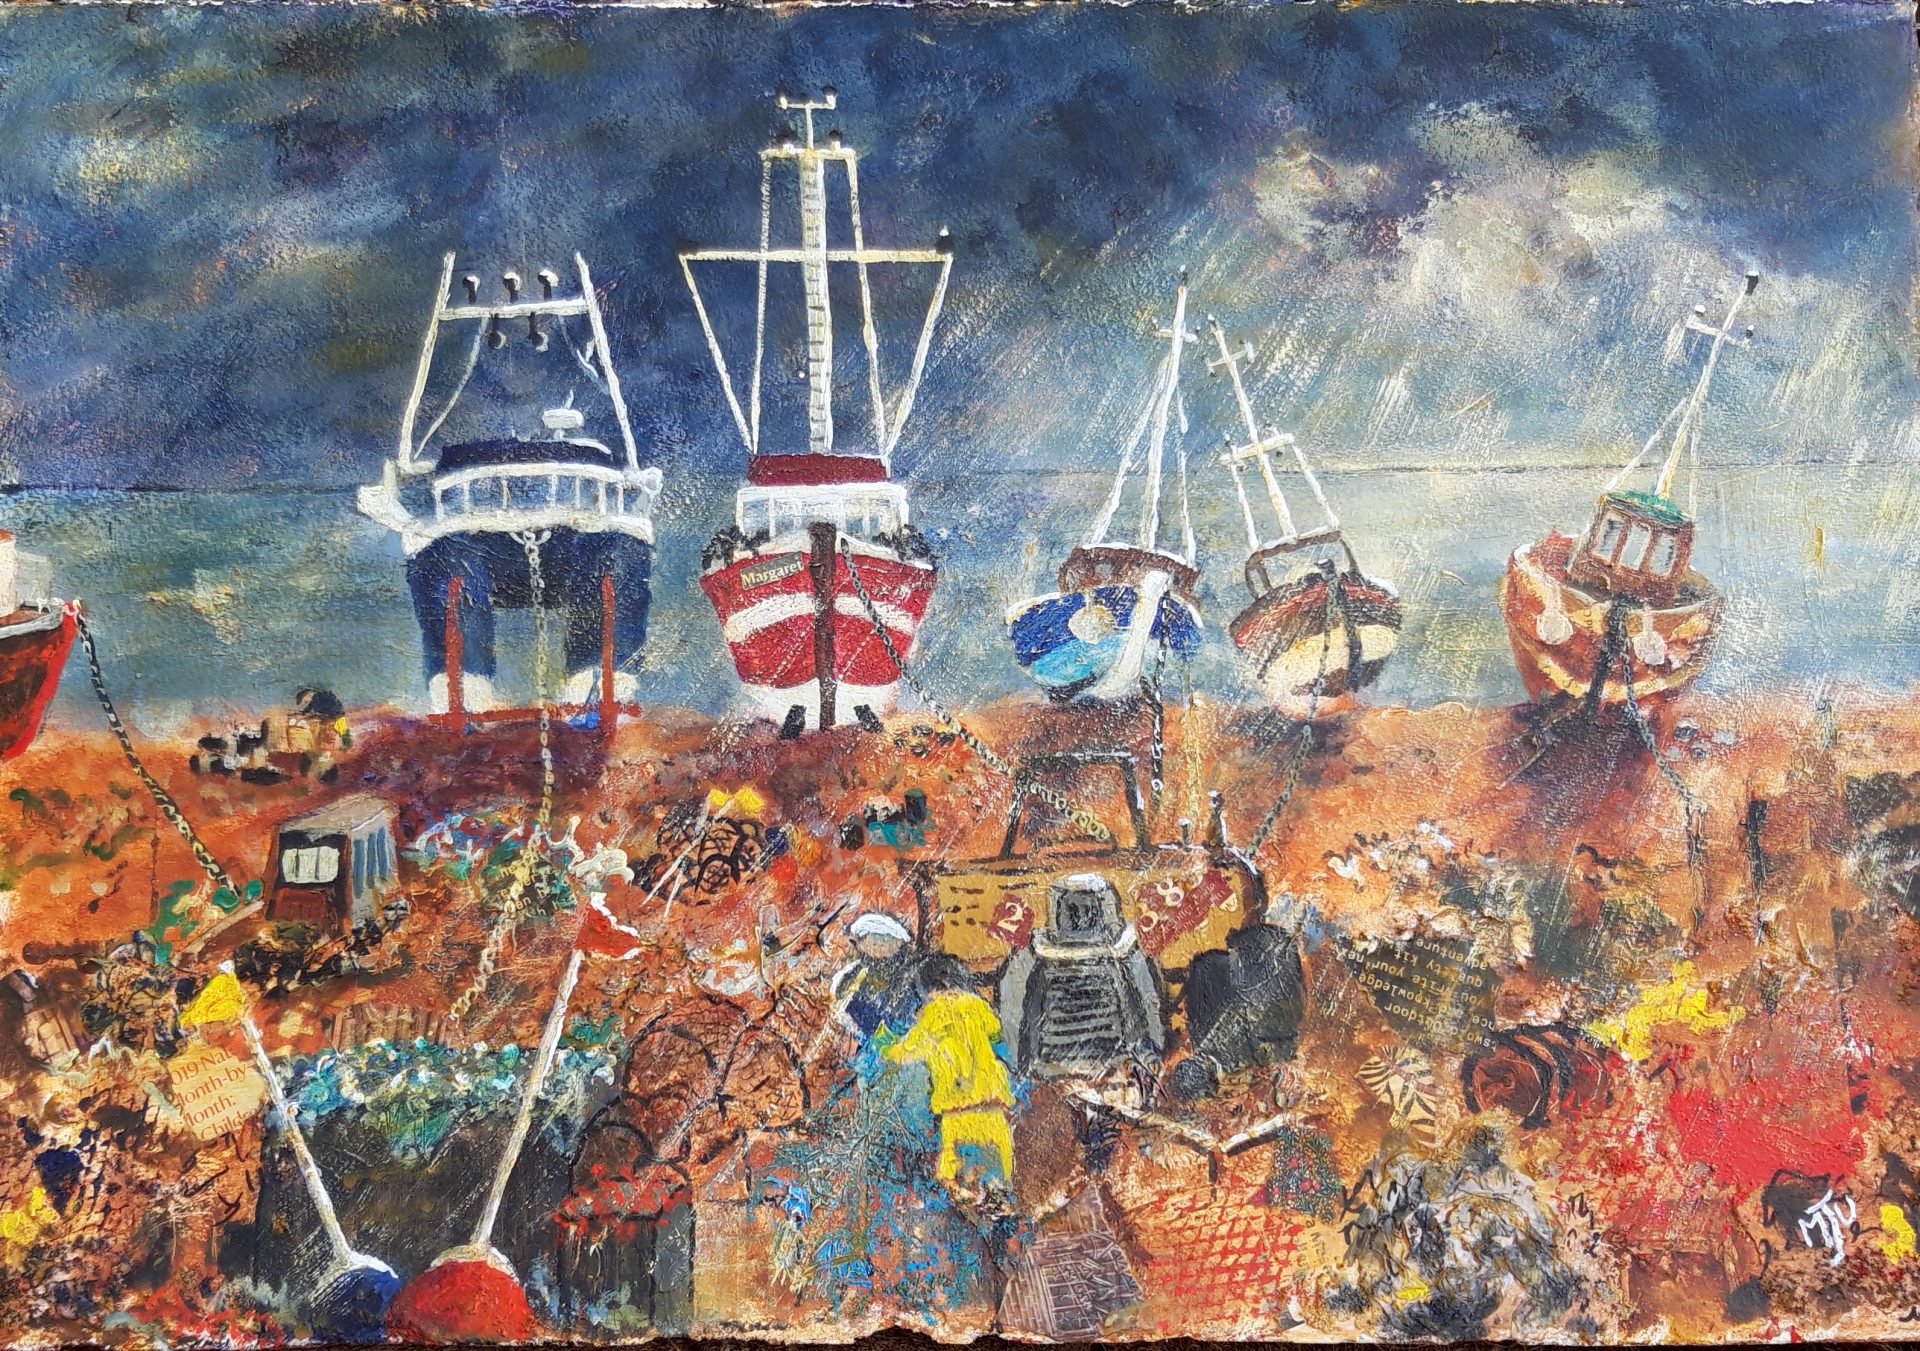 Fishing Boats on Hastings Beach Mixed Media by Mike Unsworth SOLD